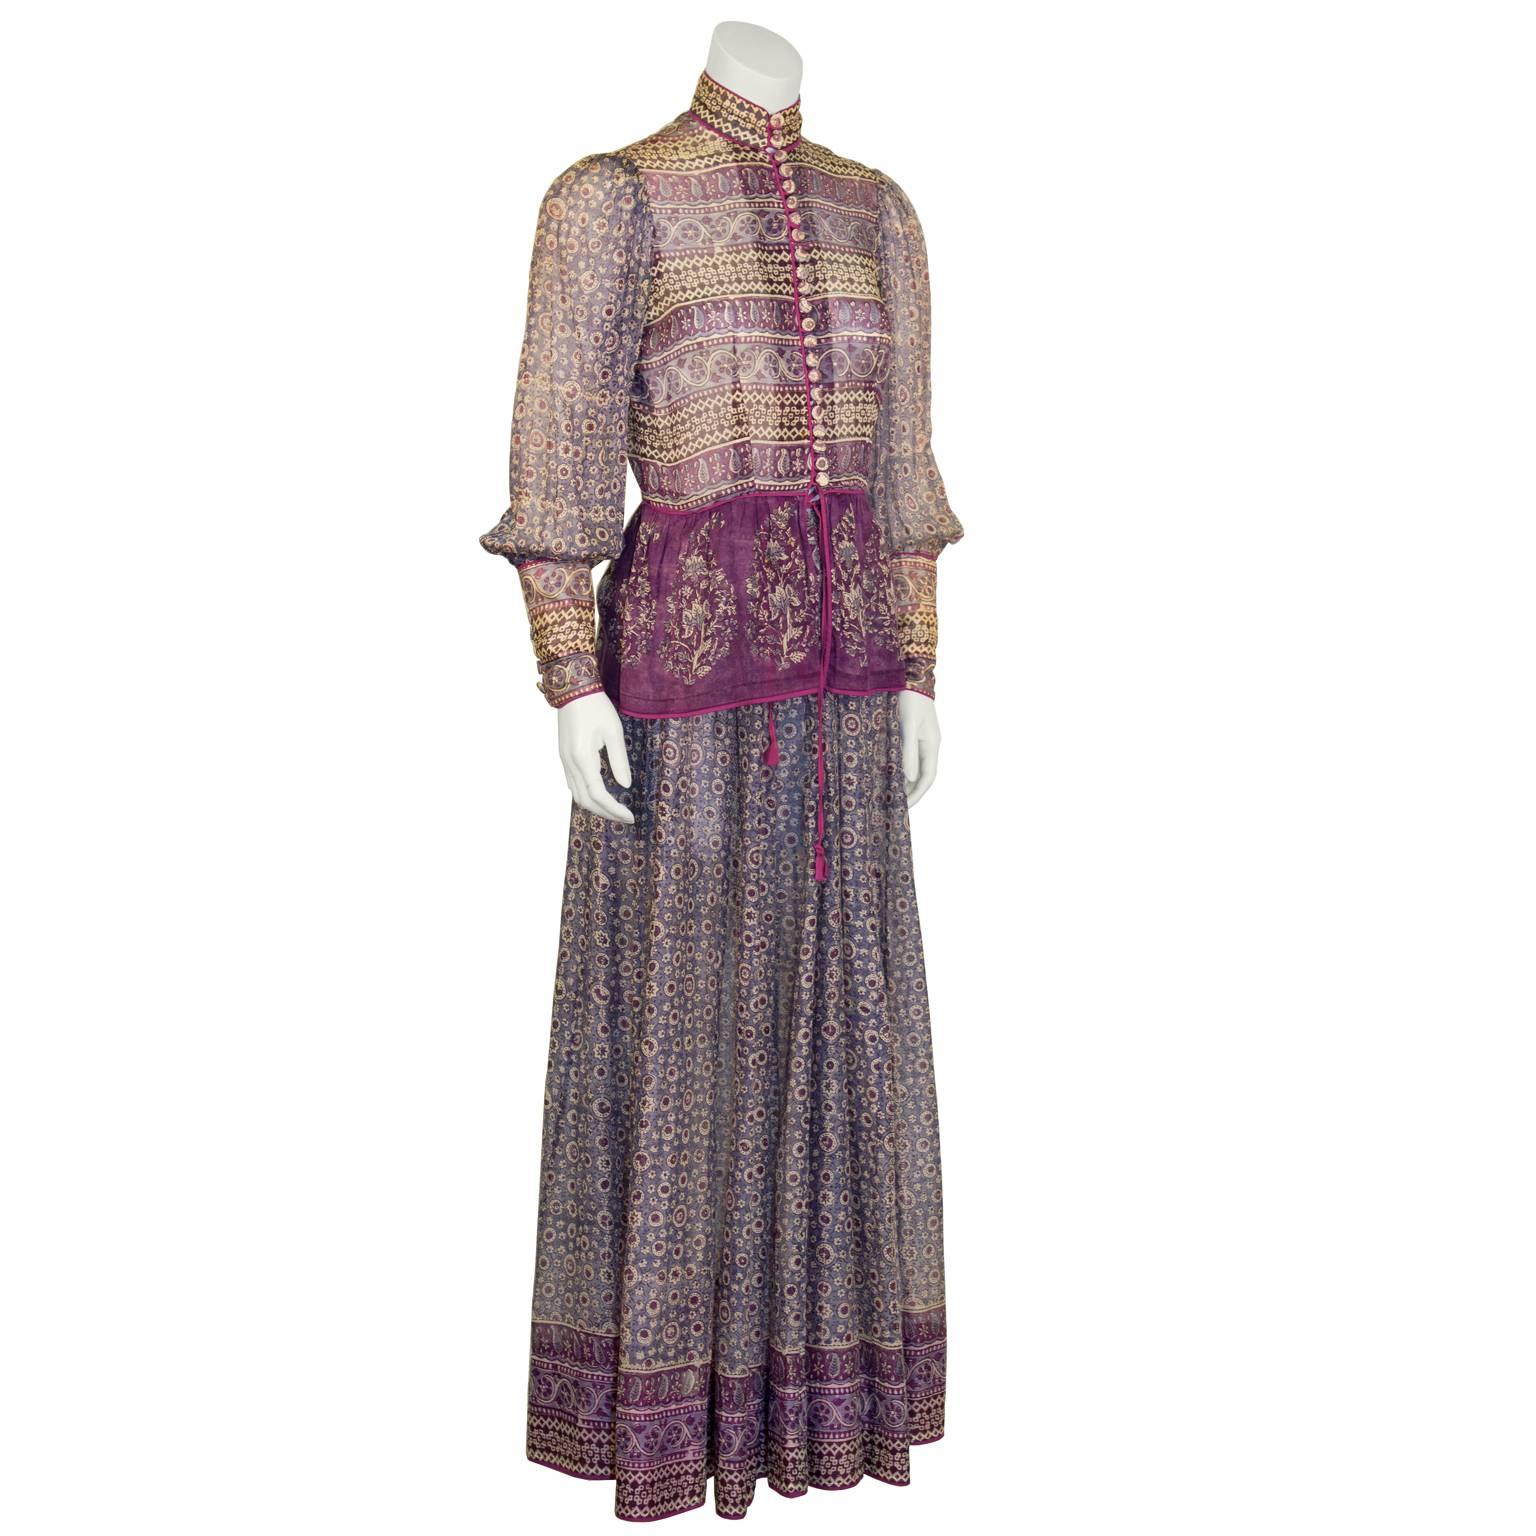 Hippie chic 1970's UK label Anokhi semi-sheer block print Indian cotton top and skirt ensemble. Long sleeve blouse has a band neck, front button fastening with several fabric covered buttons, and finishes with a soft peplum opening. Great romantic